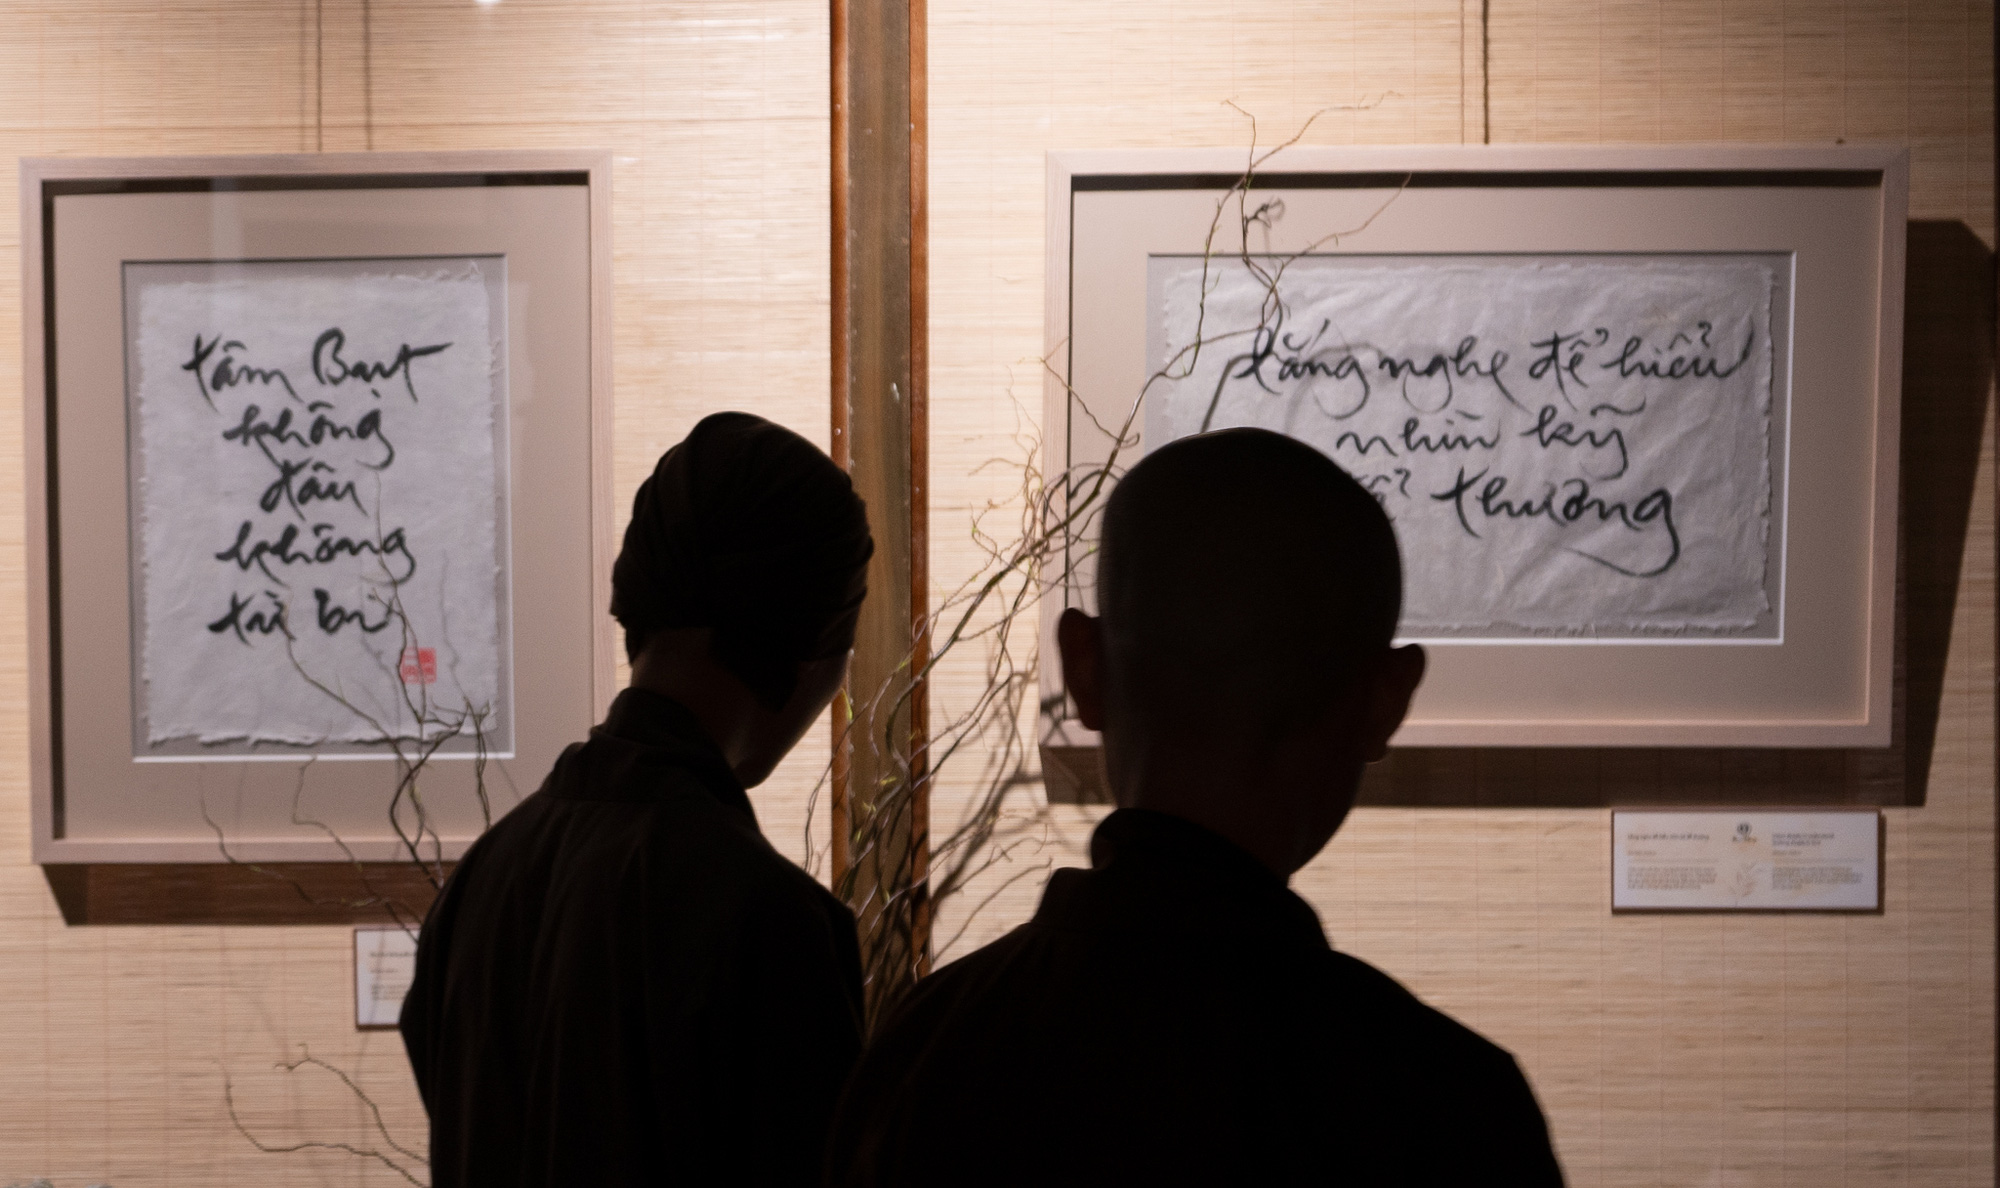 Calligraphy by Zen master Thich Nhat Hanh on display in Ho Chi Minh City